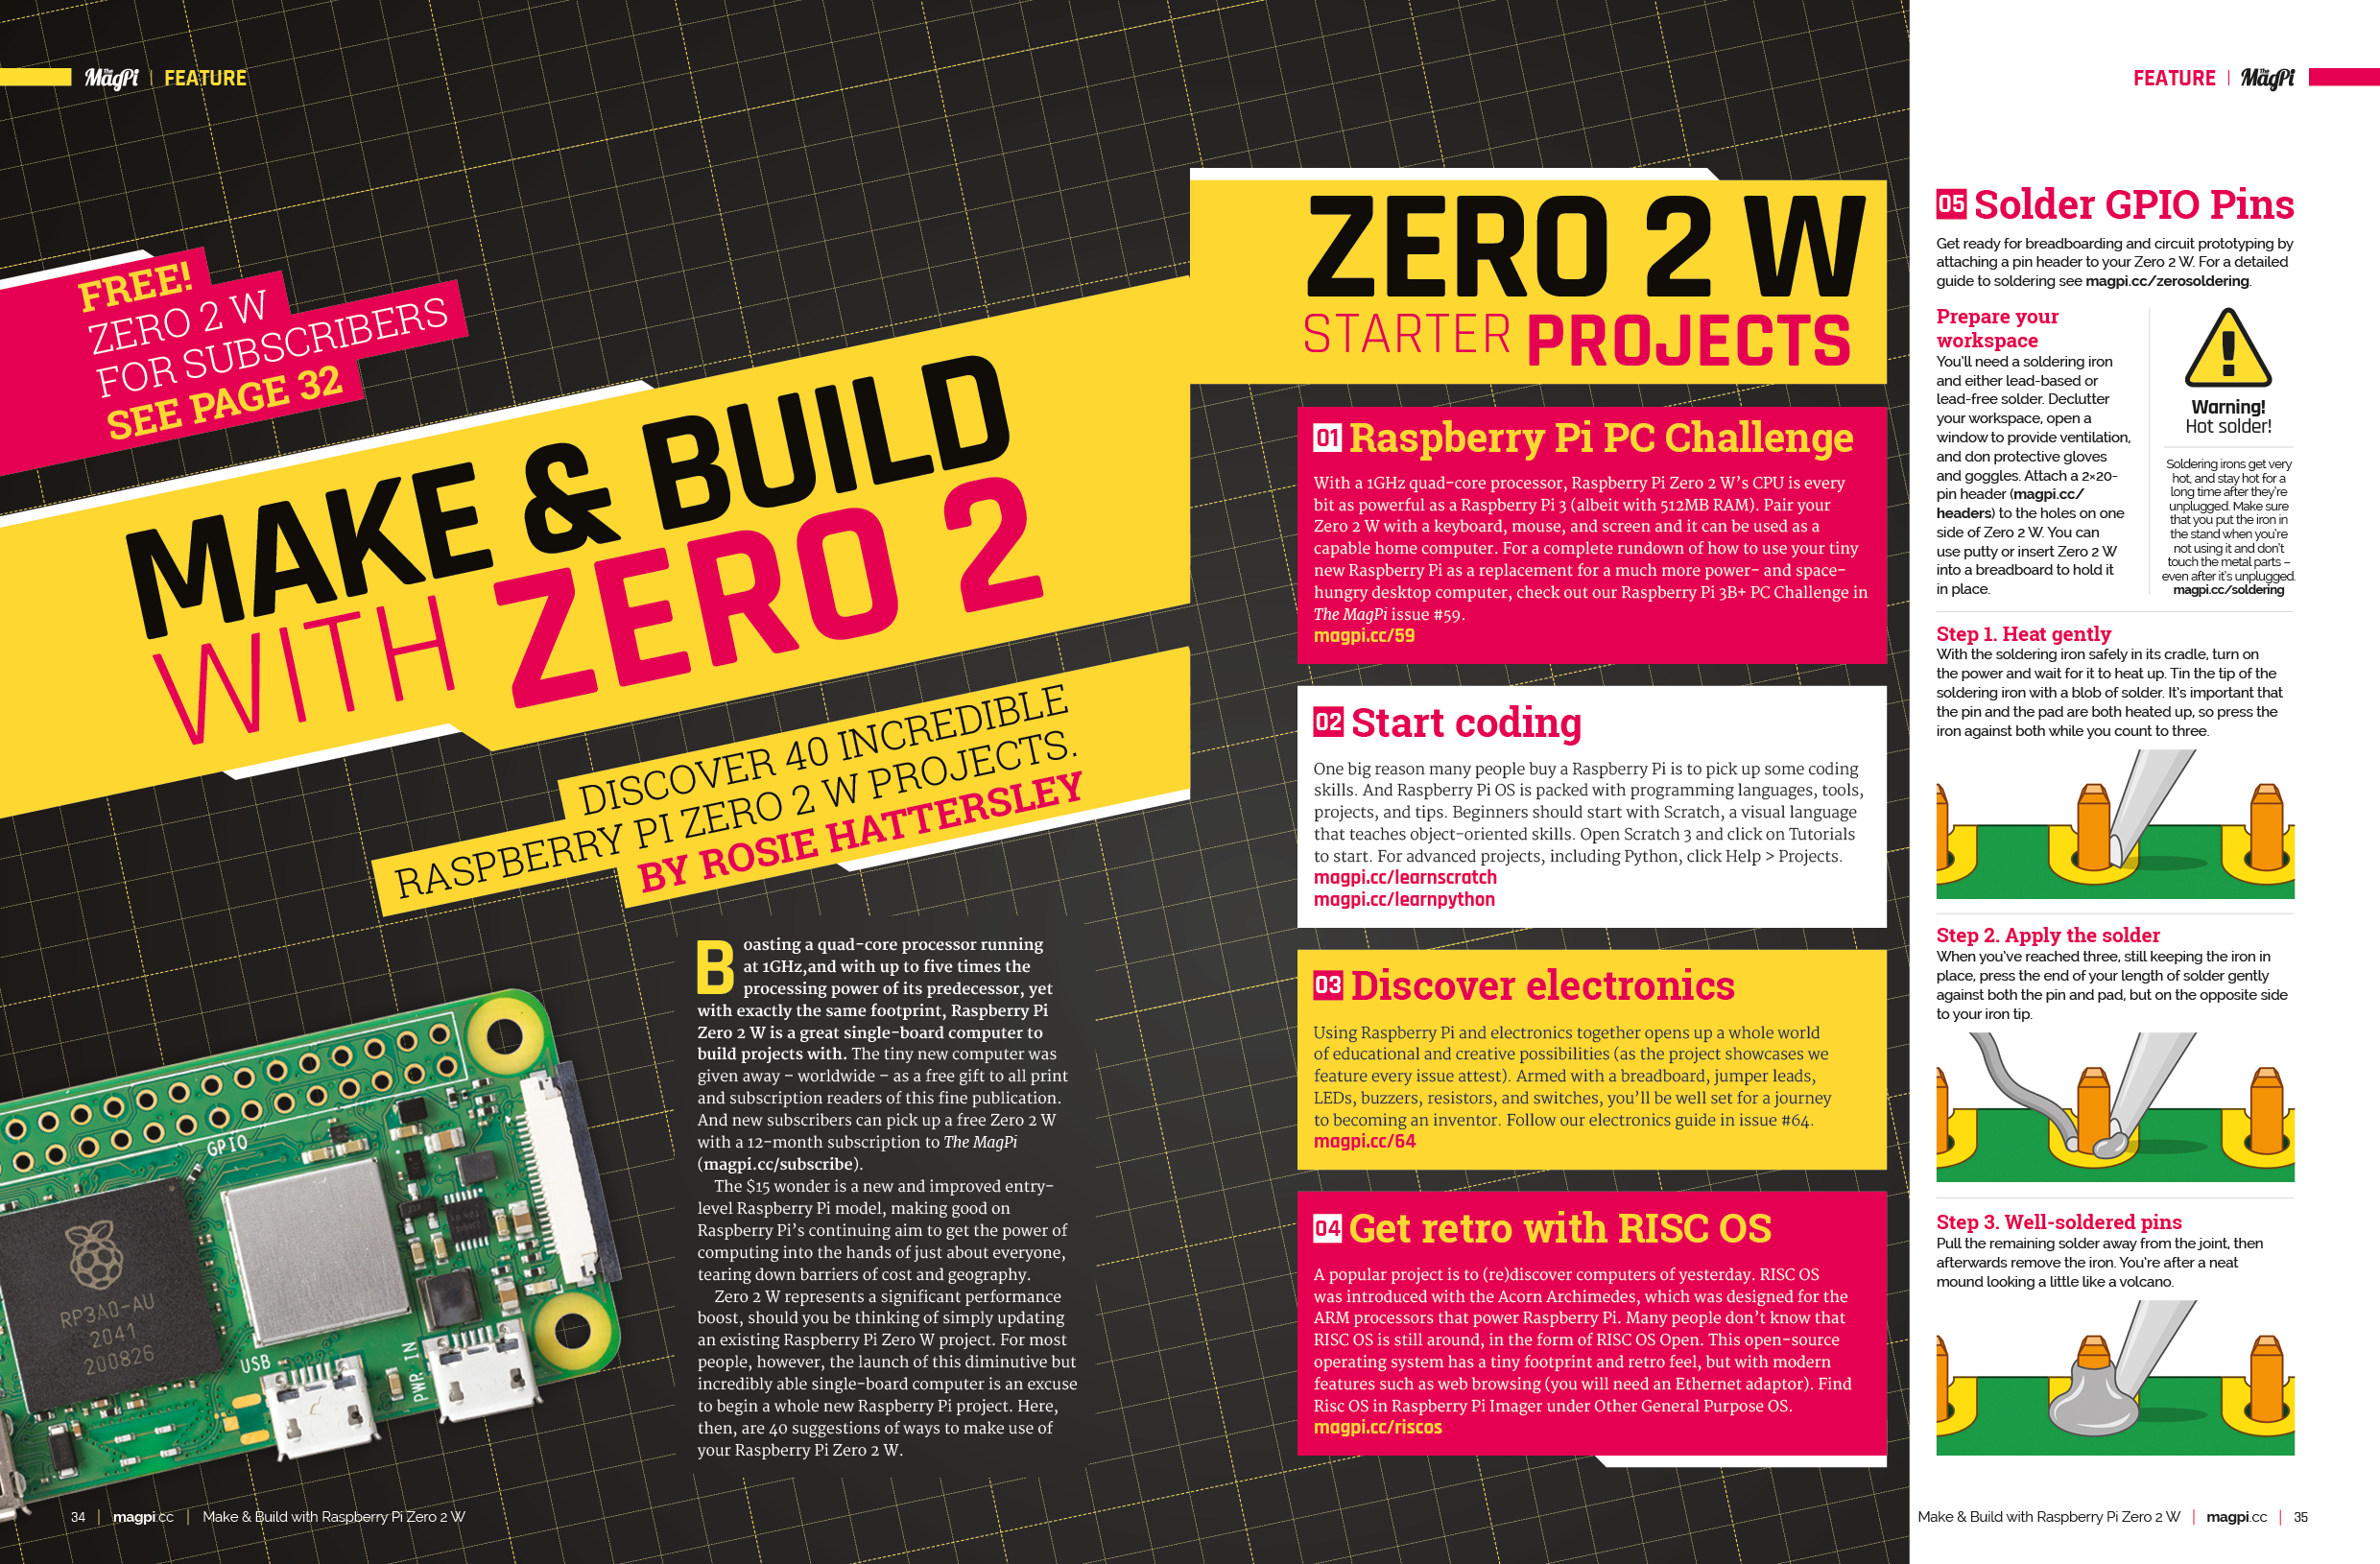 Make and Build with Zero 2 W